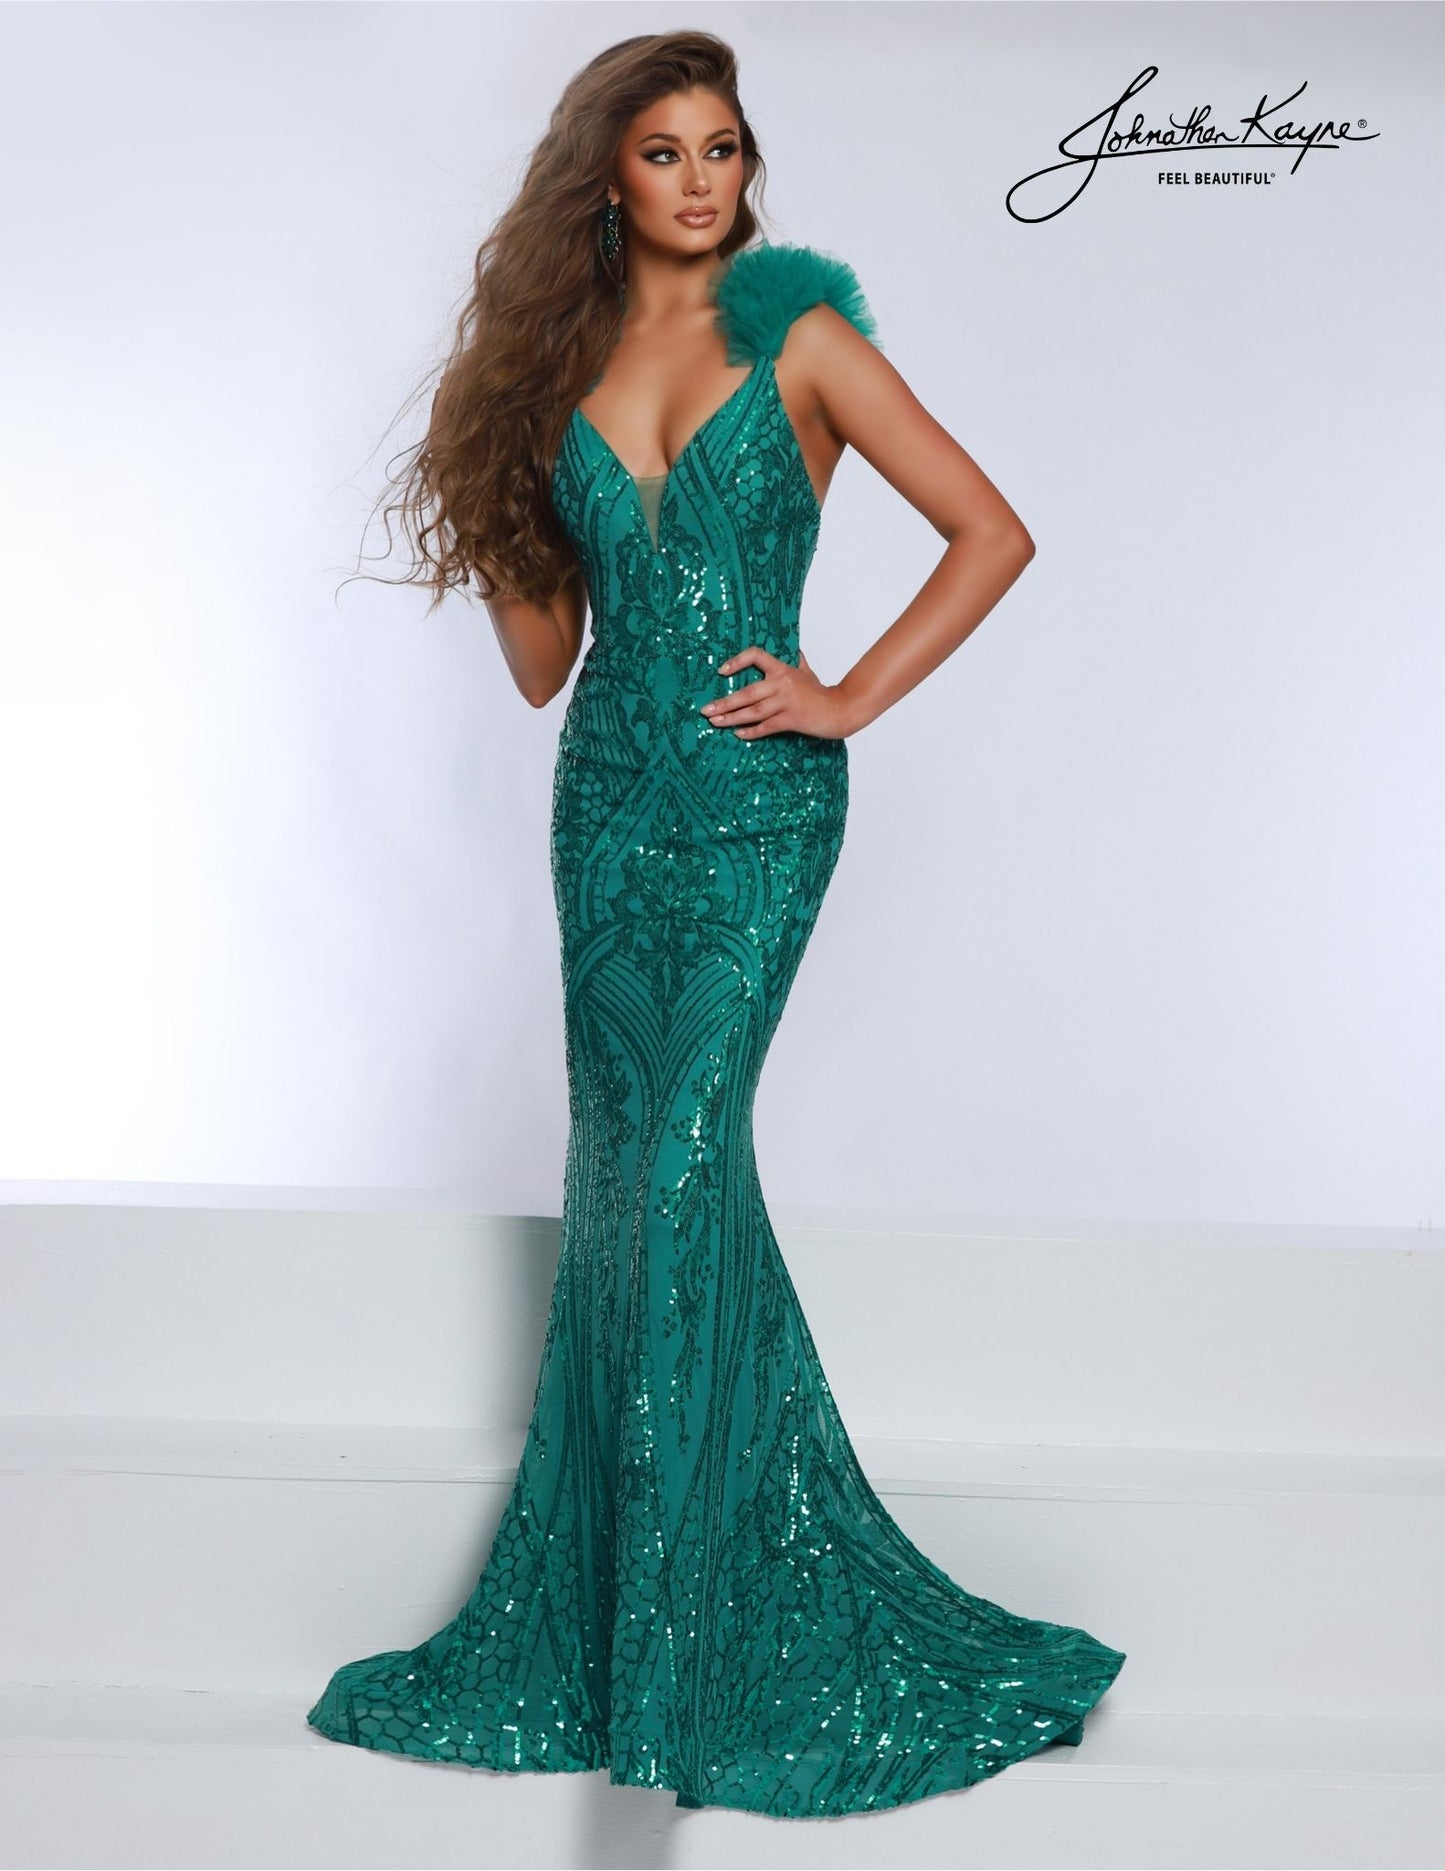 This Johnathan Kayne 2807 Long Prom Dress is designed with a sequined bodice, ruffled tulle straps, and a mermaid-style skirt. Perfect for formal occasions, it creates an elegant and eye-catching look. Make an unforgettable entrance and stay comfortable all night with the high-quality tulle and sequins. Shine and captivate in this fitted Sequin Powermesh gown – a stunning masterpiece designed to make you the center of attention, especially with the ruffle tulle straps!